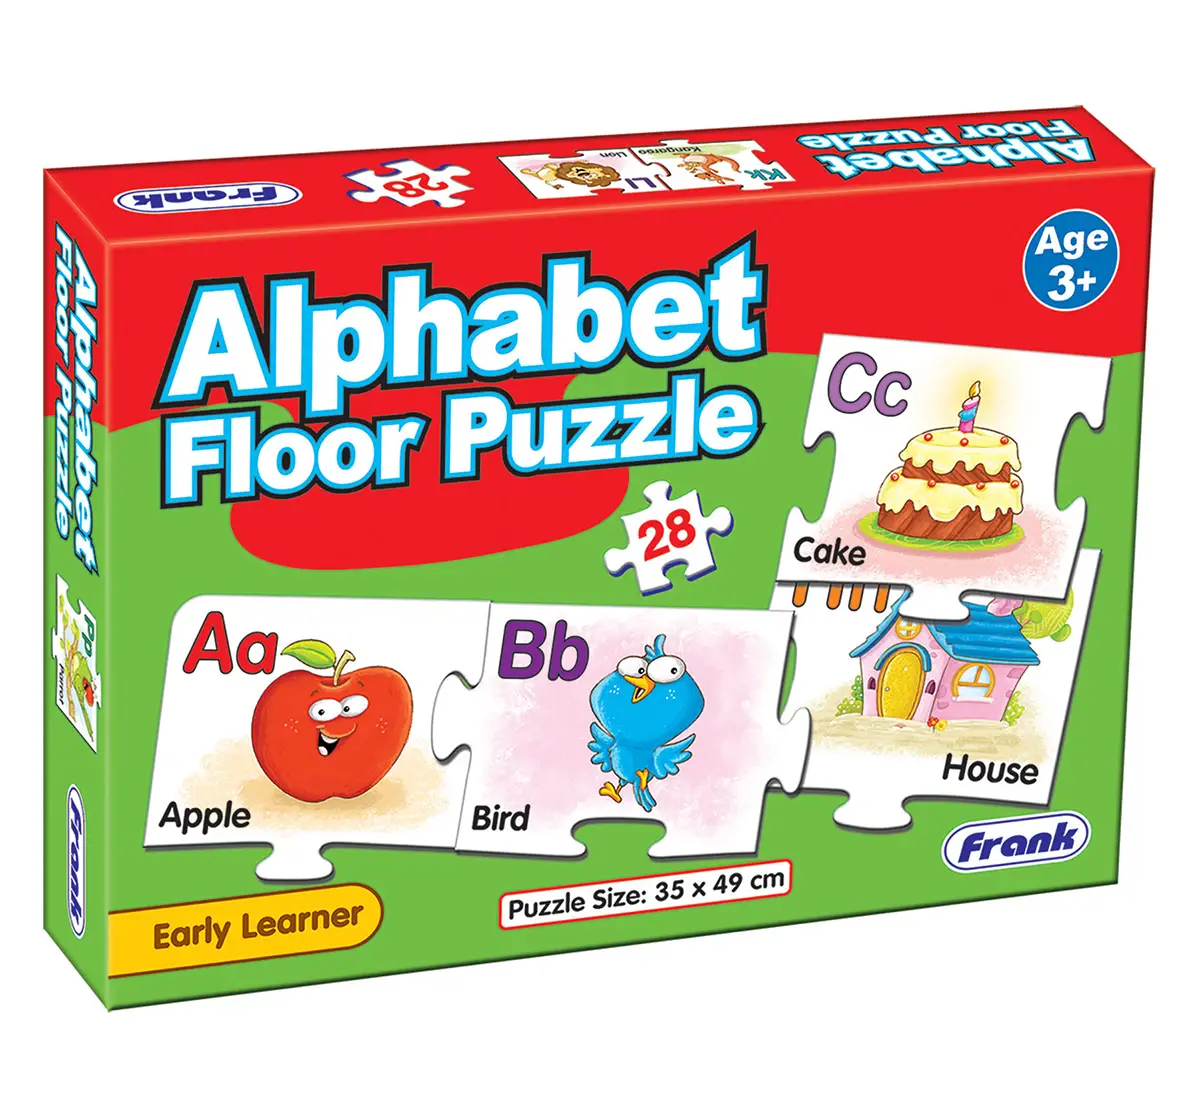 Frank Alphabet Floor Puzzles for Kids age 3Y+ 